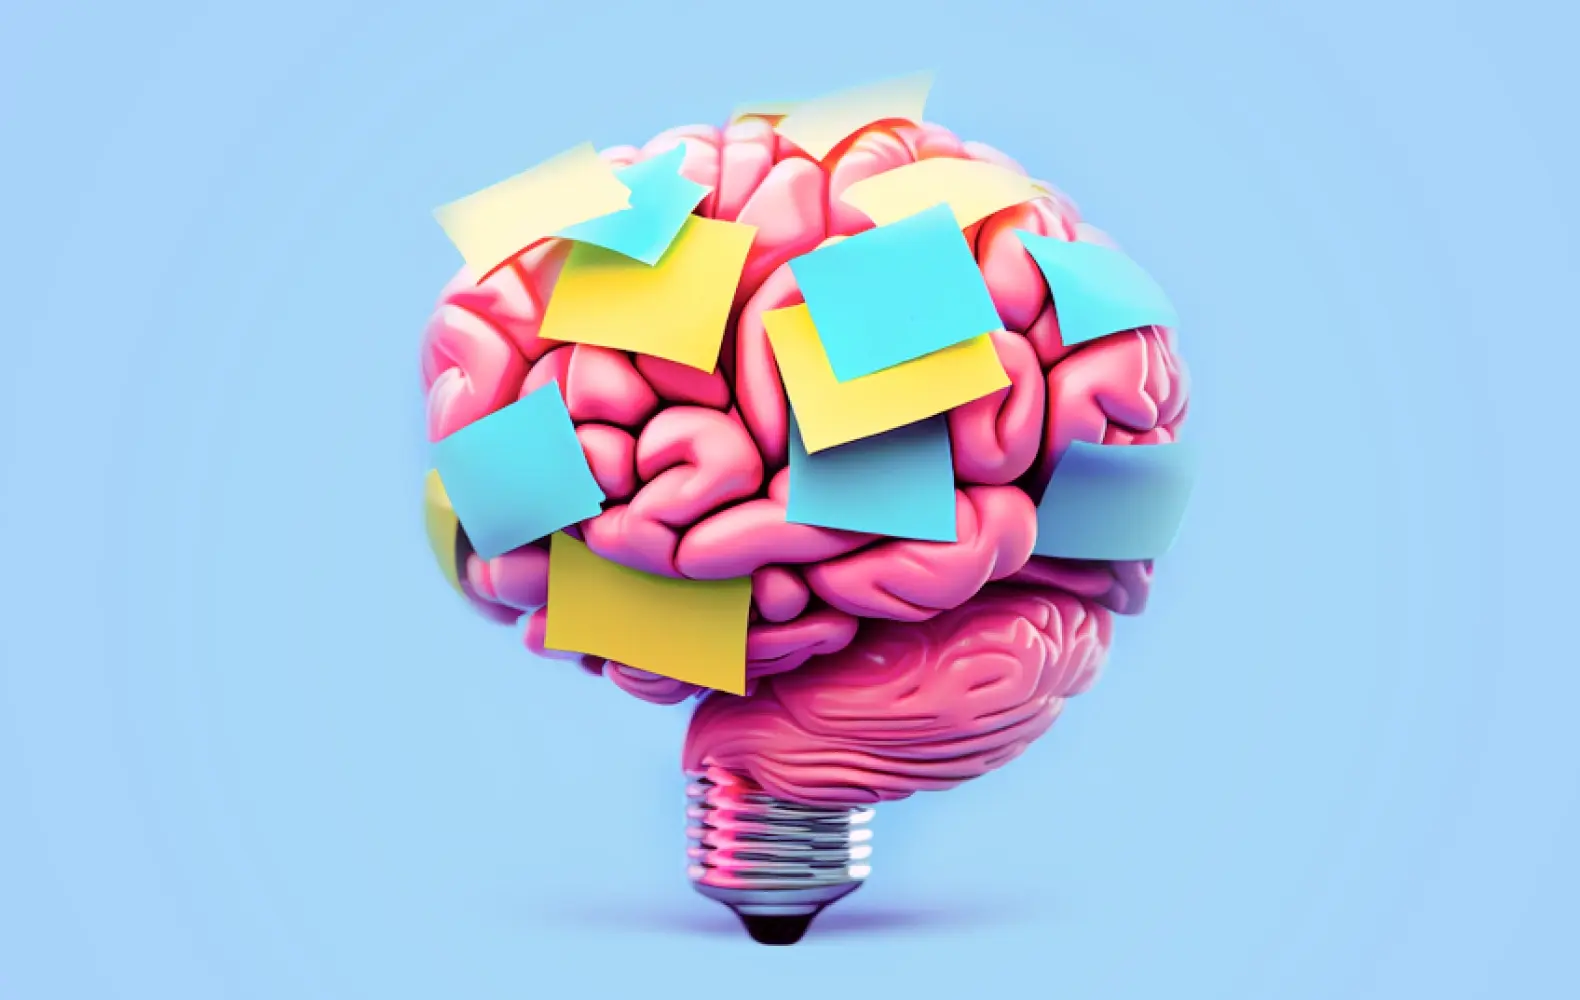 Model of brain with sticky notes